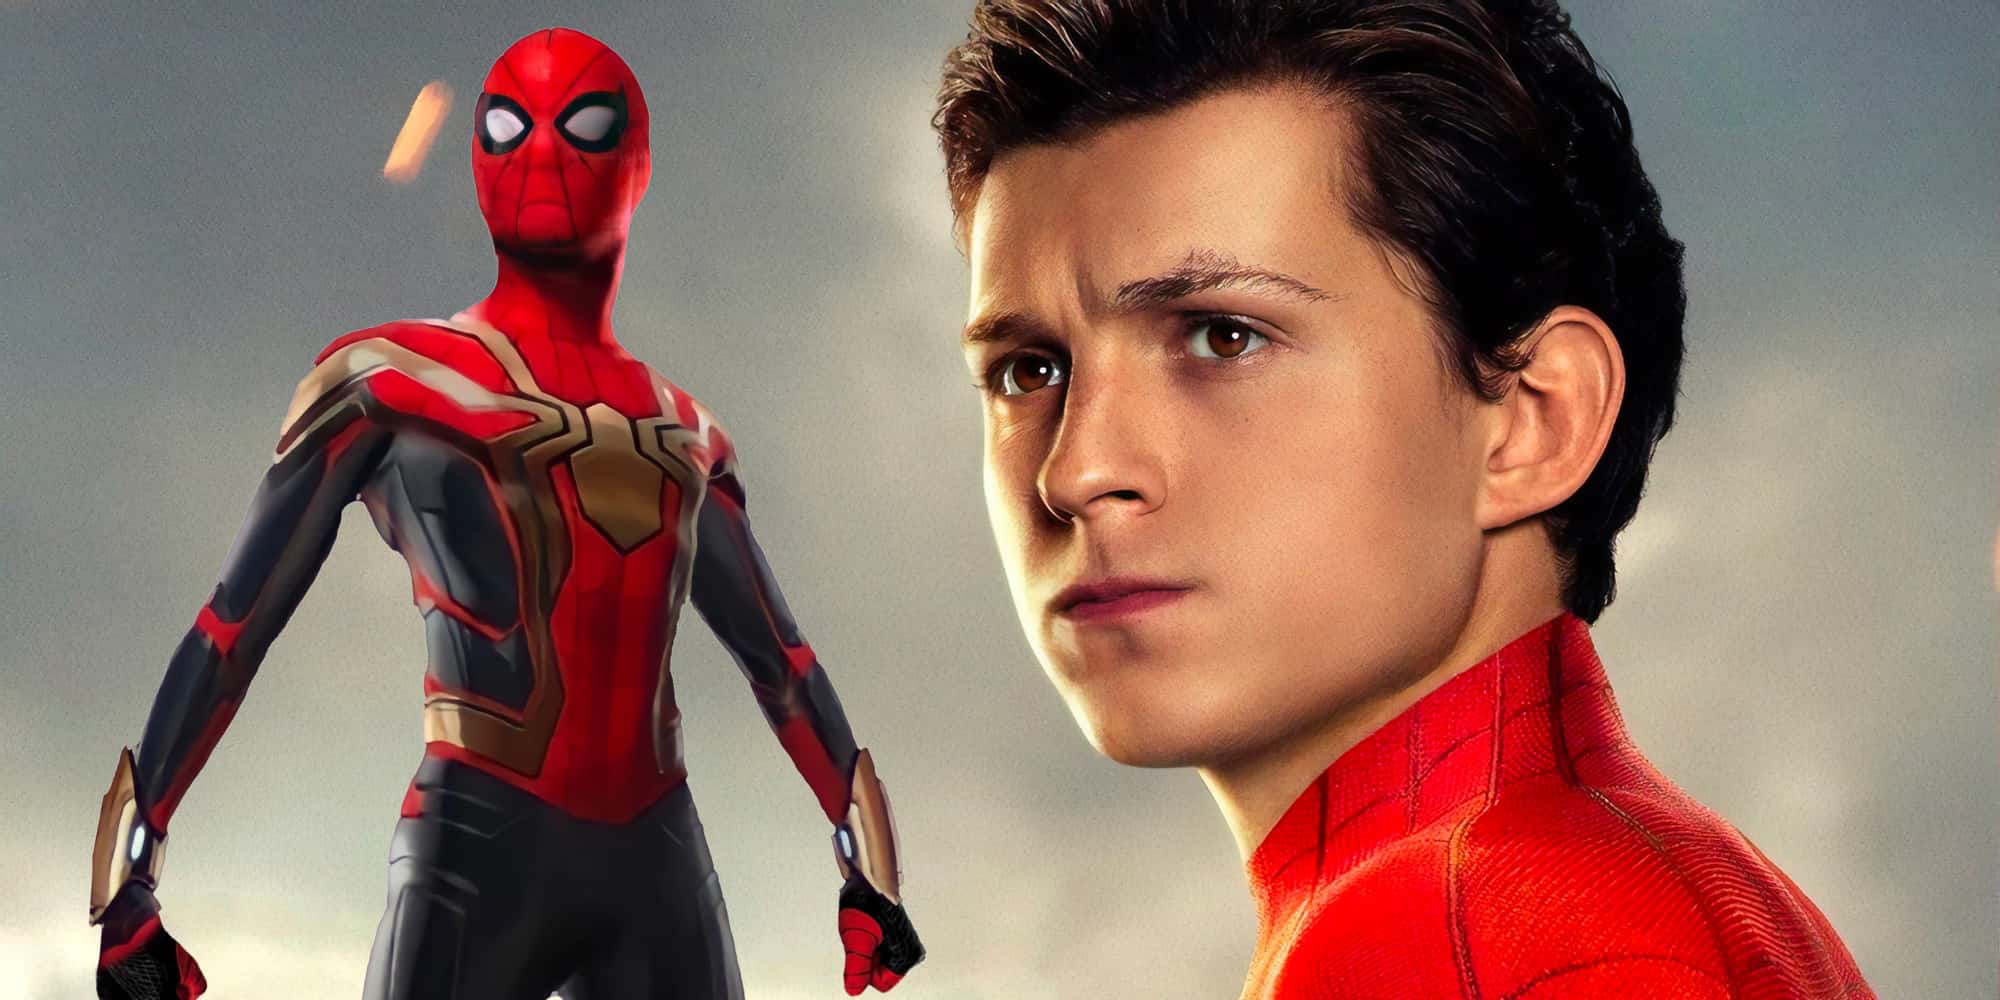 Spider-Man 4: What's Happening With The Next Spider-Man Film?